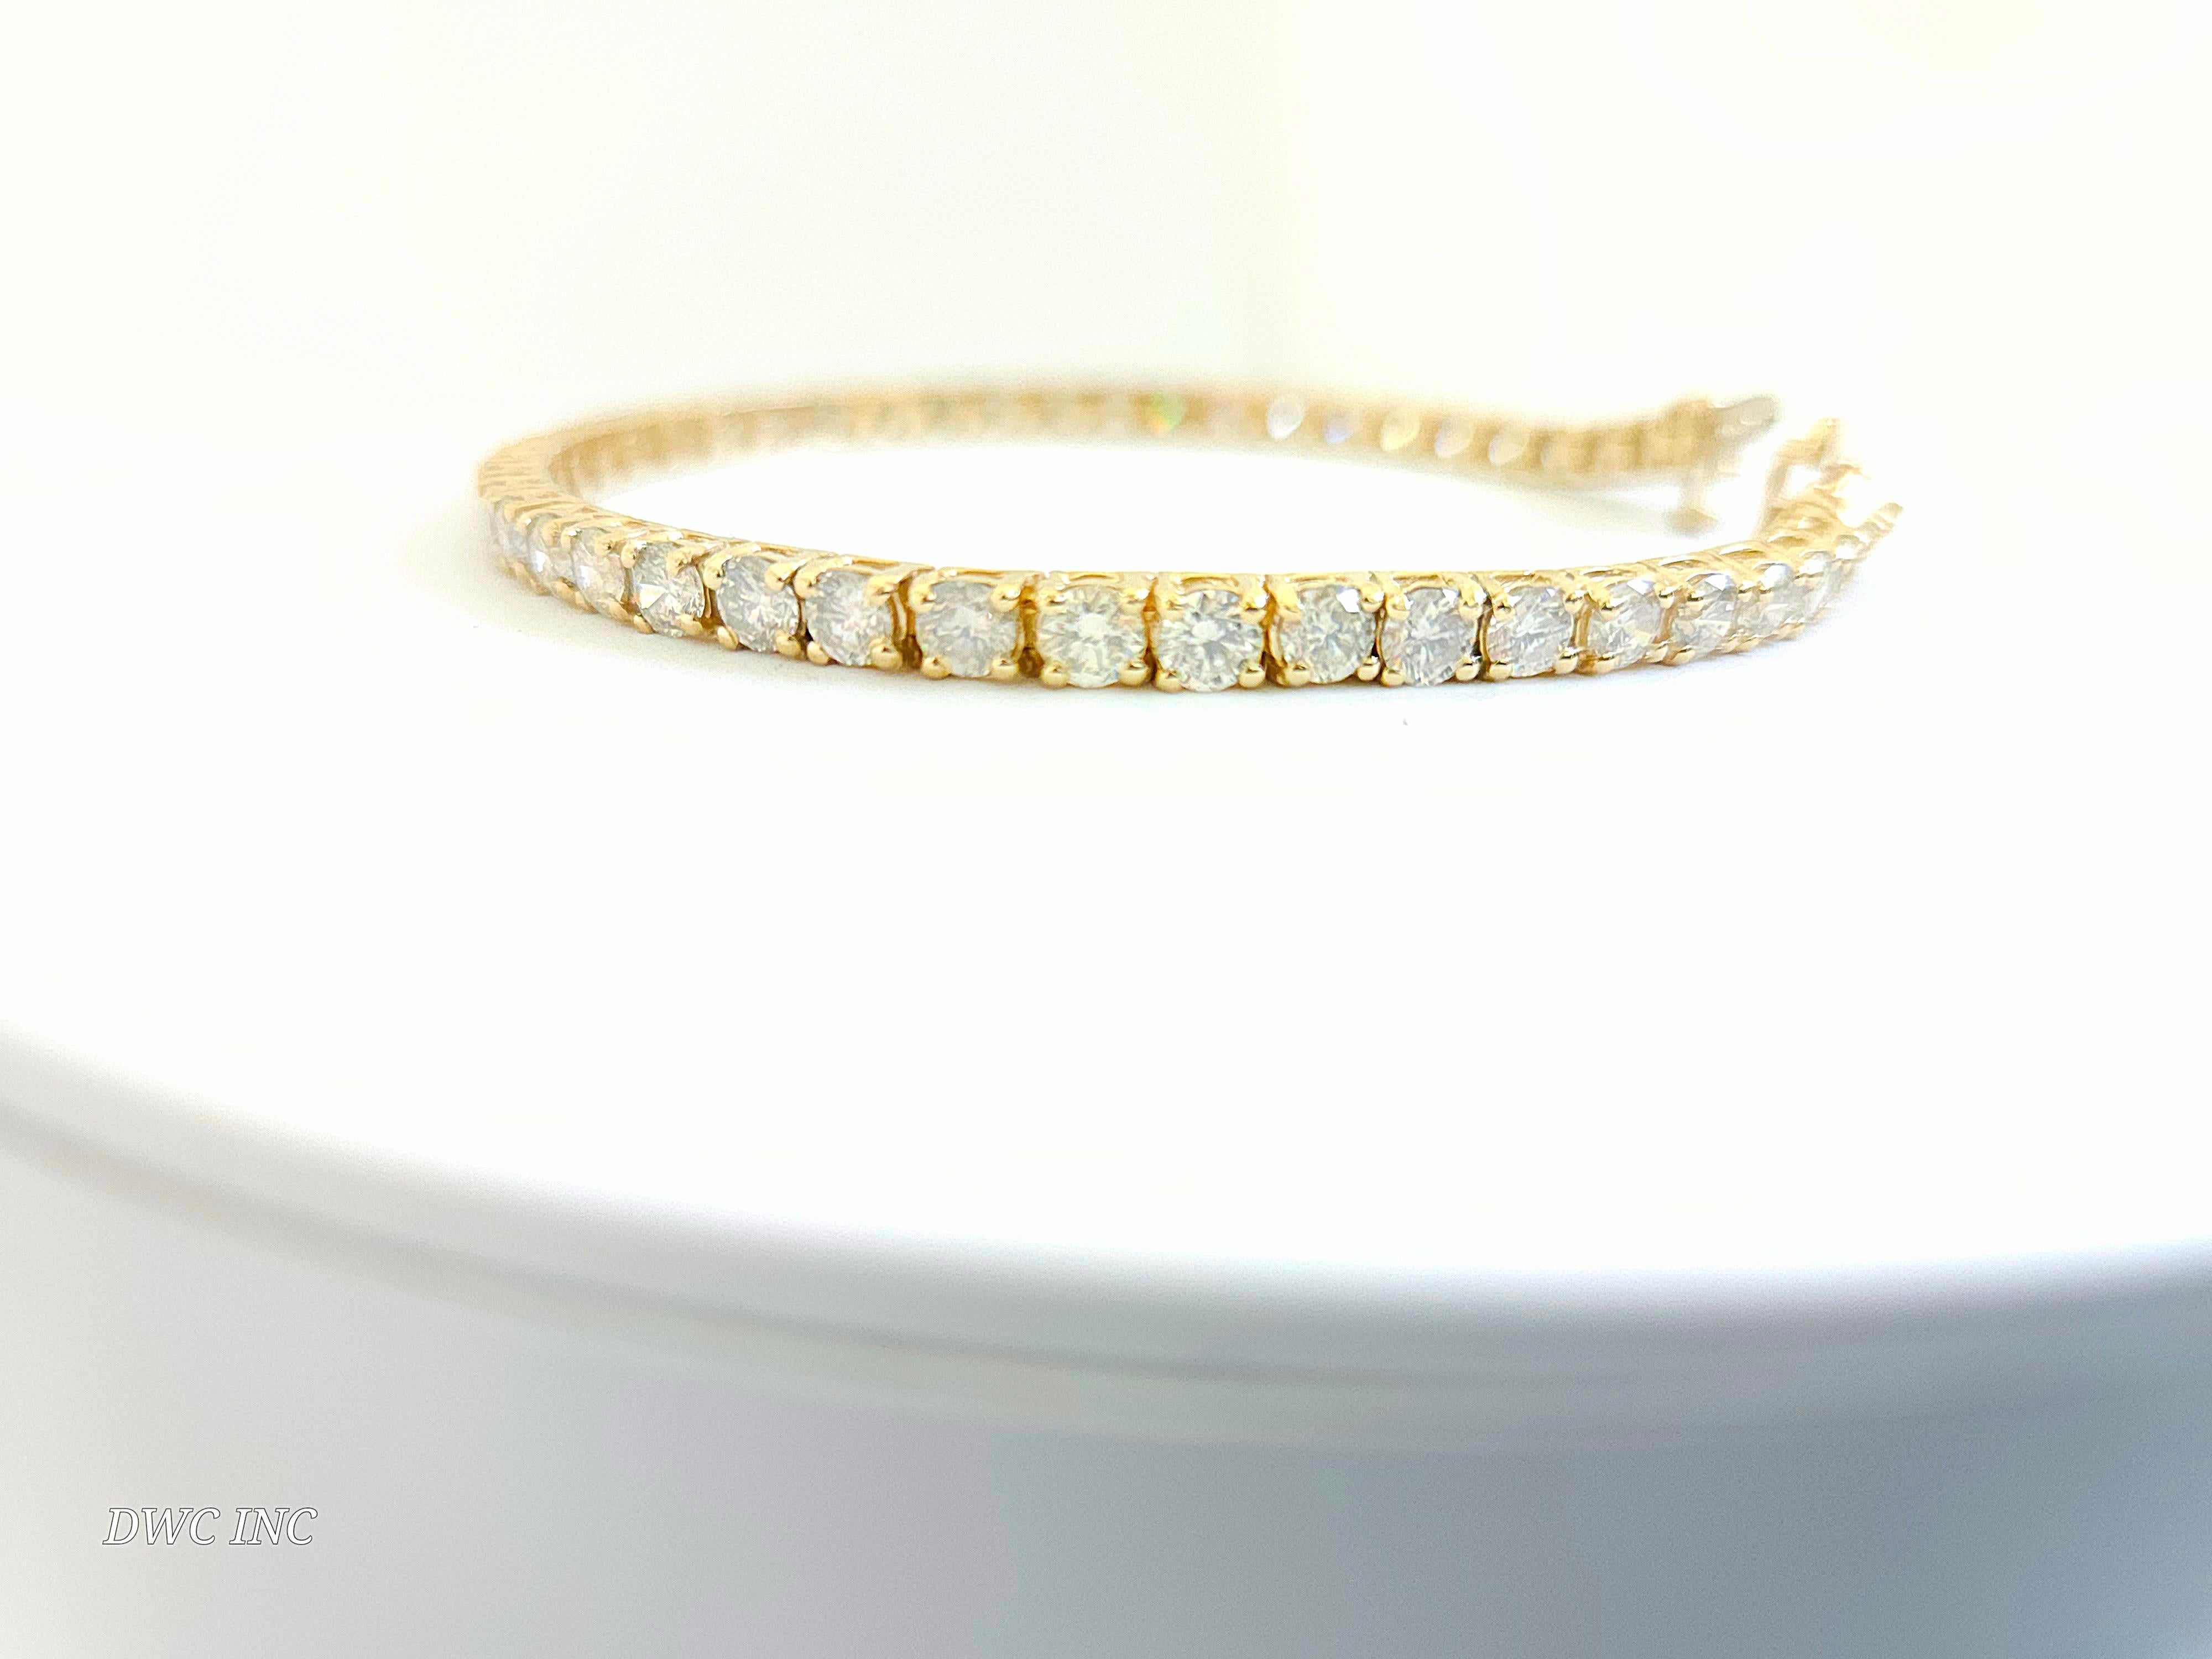 7.93 Carat Round Brilliant Cut Diamond Tennis Bracelet 14 Karat Yellow Gold In New Condition For Sale In Great Neck, NY